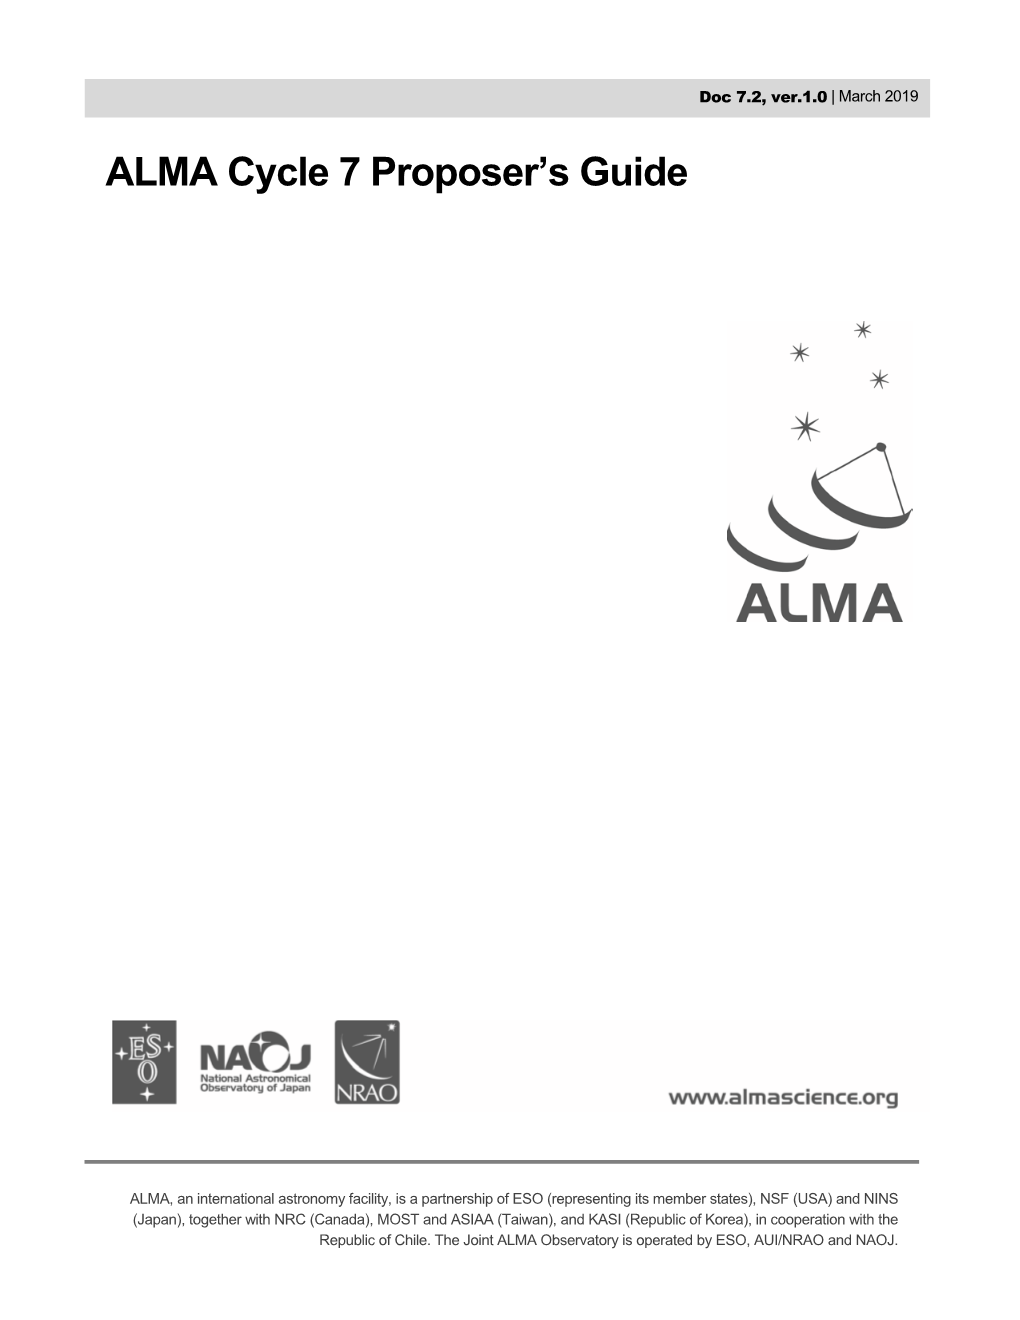 Cycle 7 Proposer's Guide